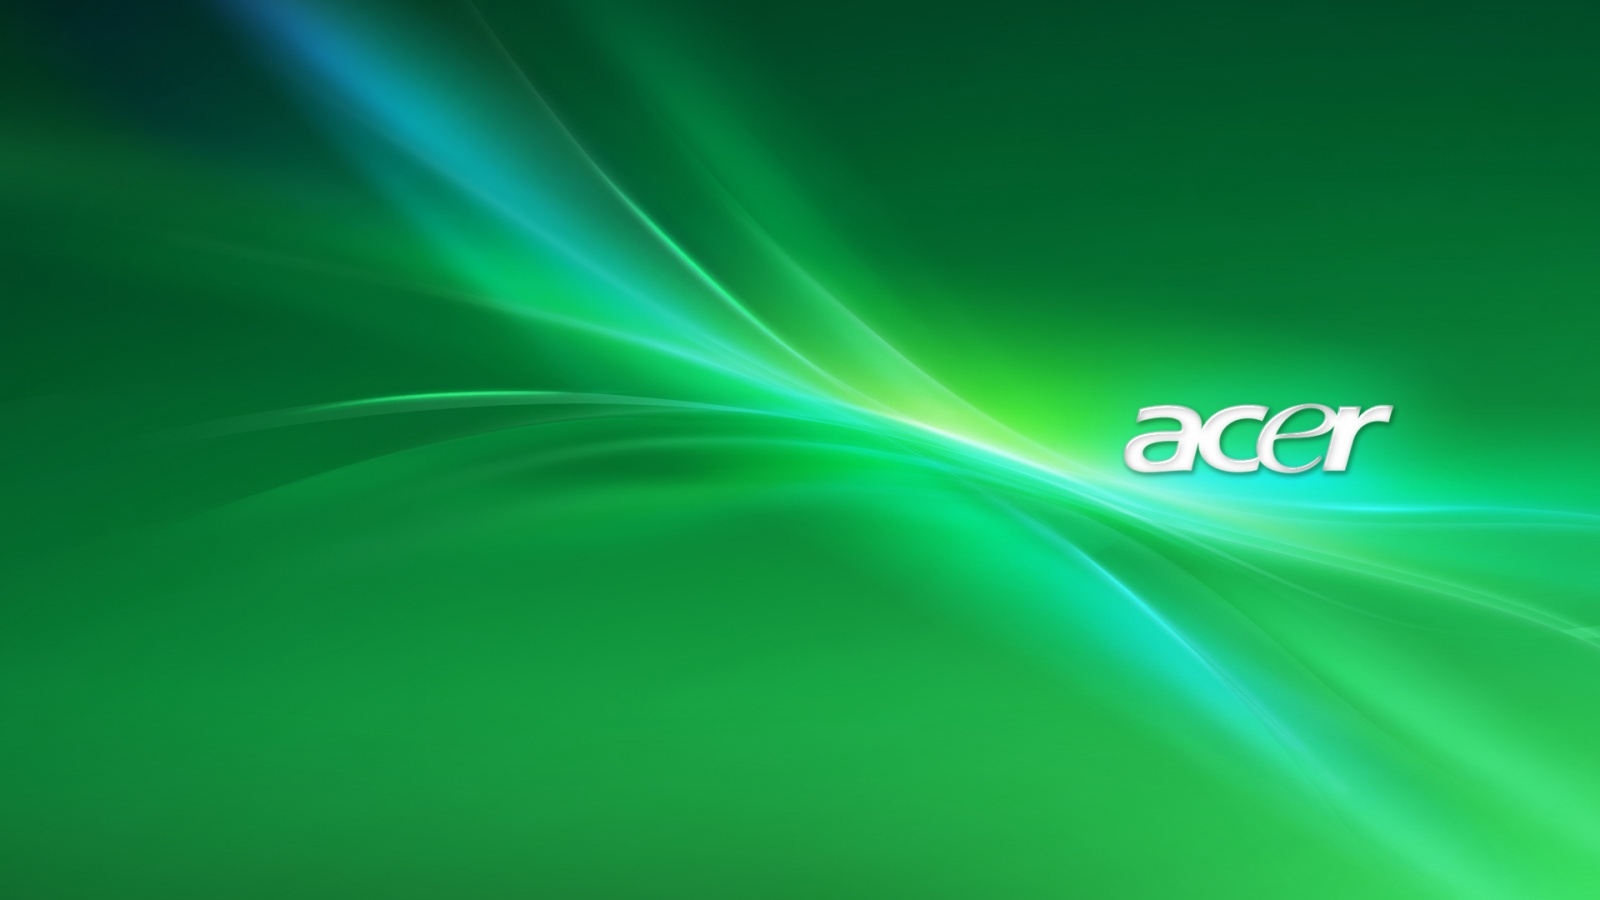 Acer Green Wave X Close